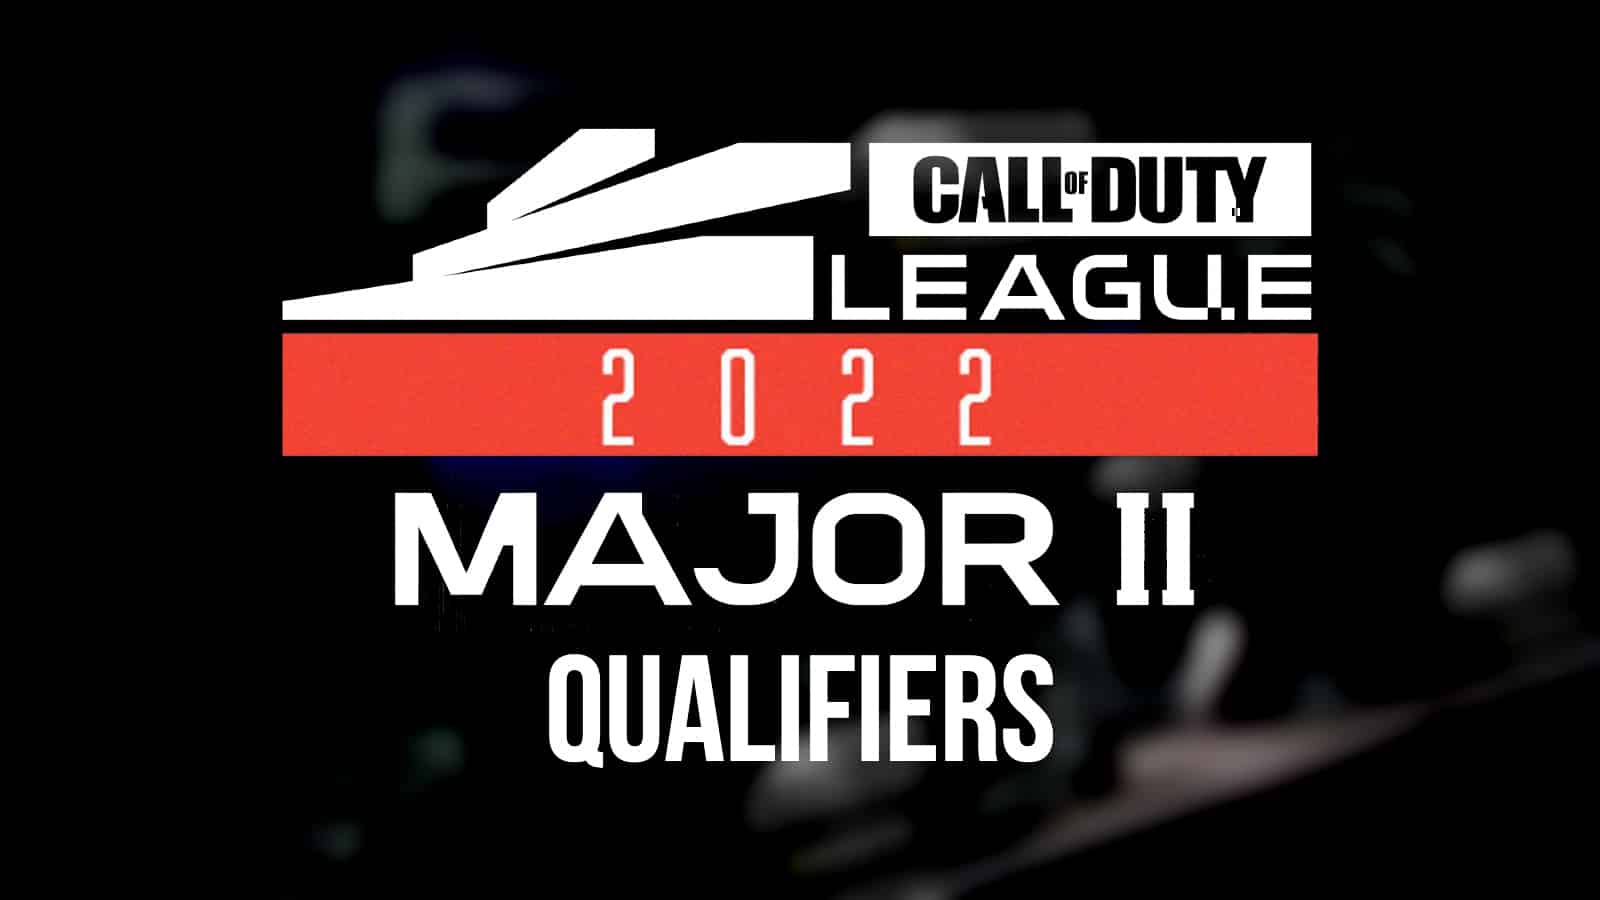 CDL Major 2 Qualifiers Final placements, results, and bracket